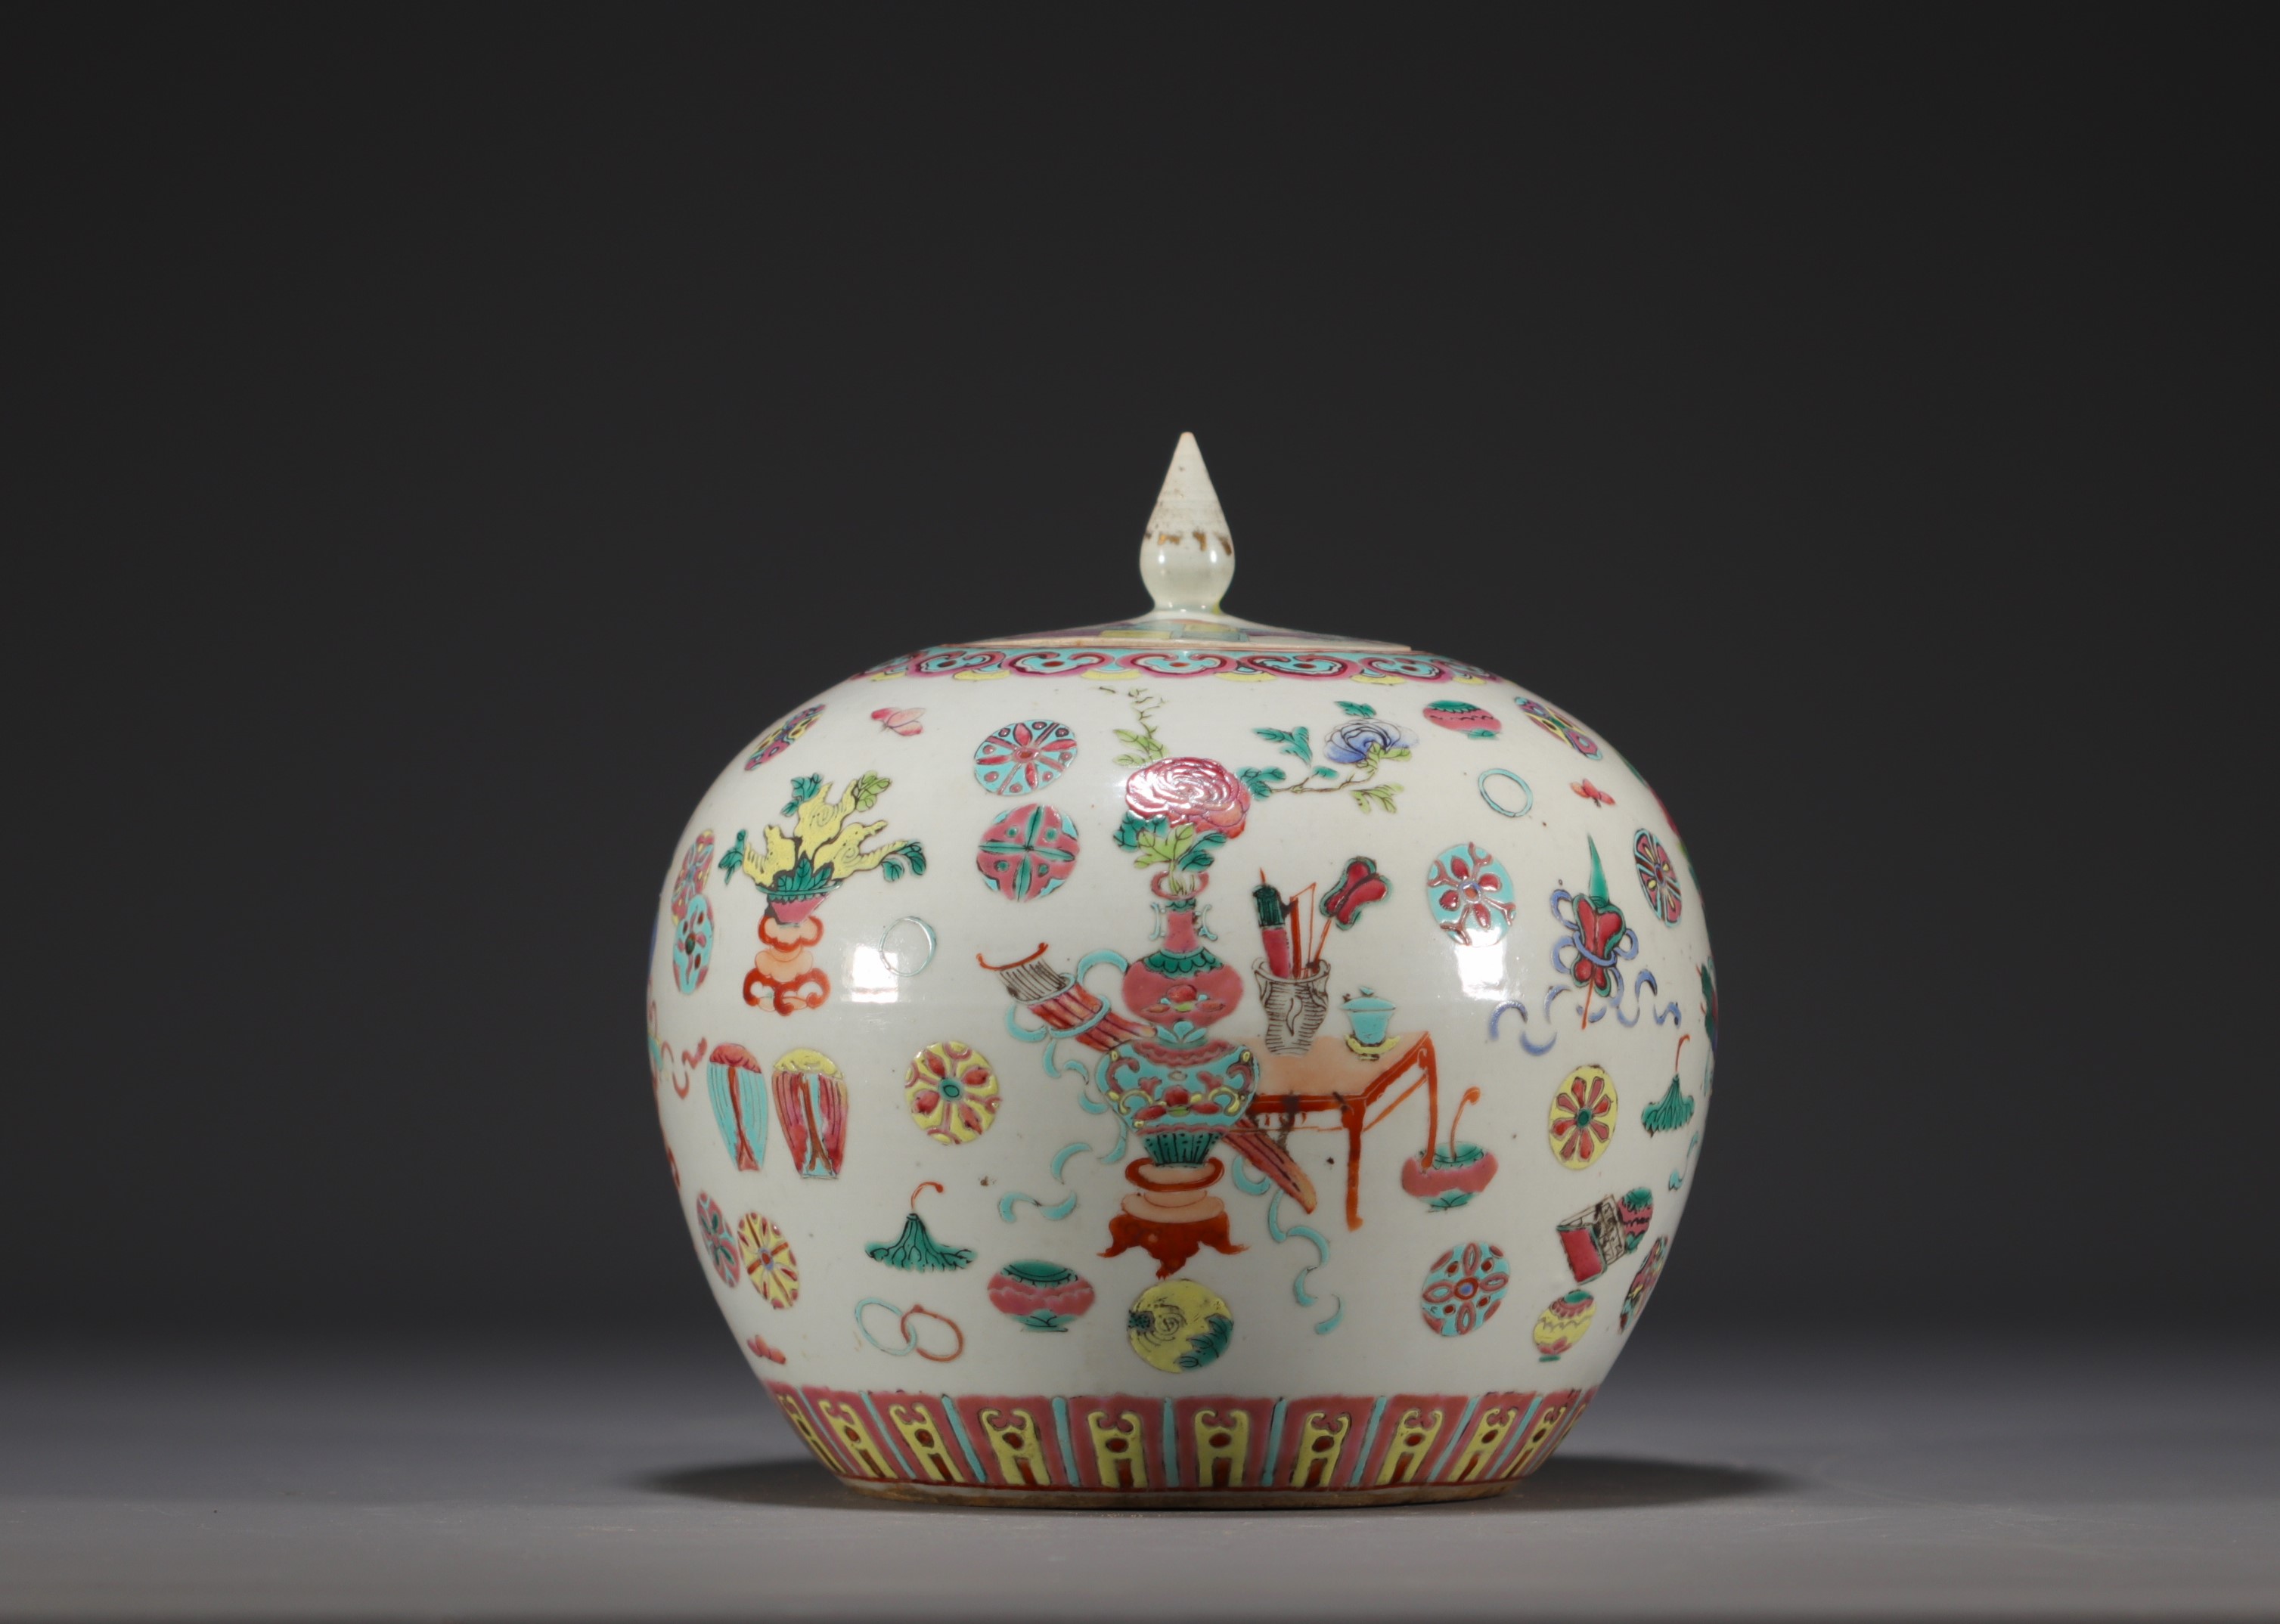 China - A famille rose porcelain ginger pot, 19th century.